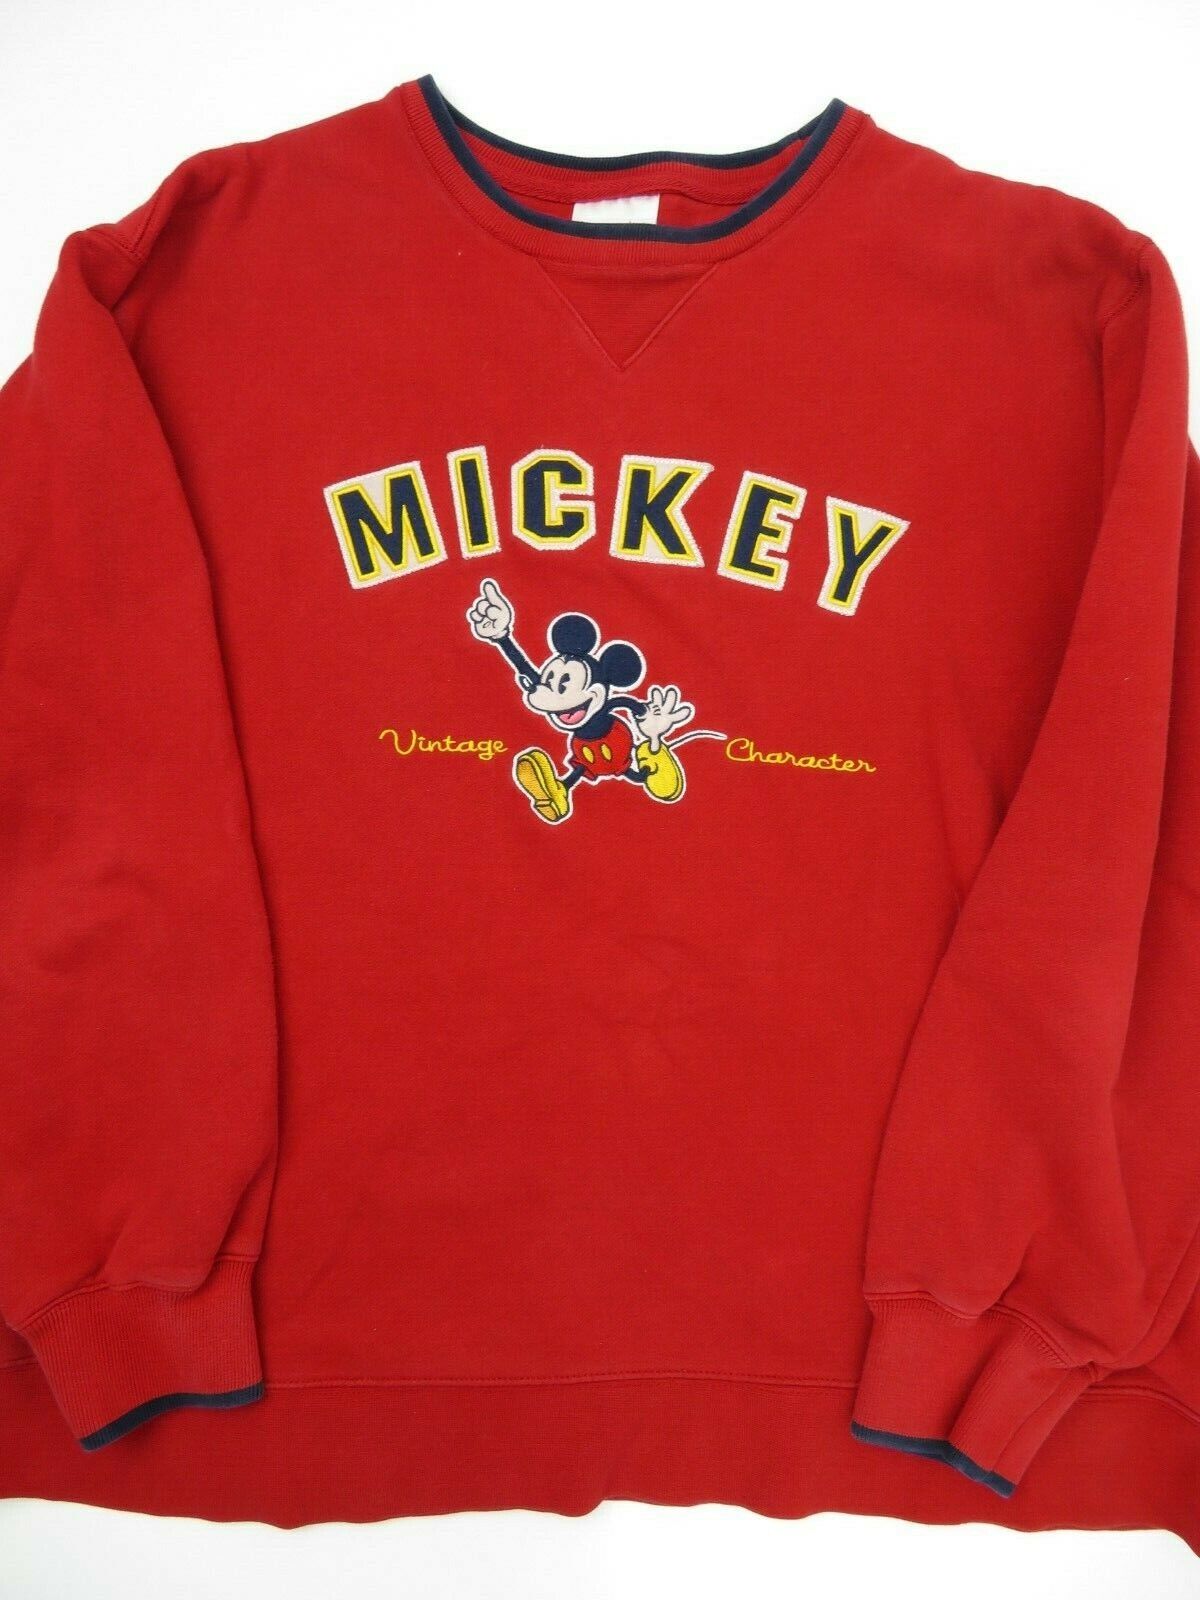 Disney Mickey Mouse Vintage Character Red Sweat Shirt Men's Si...